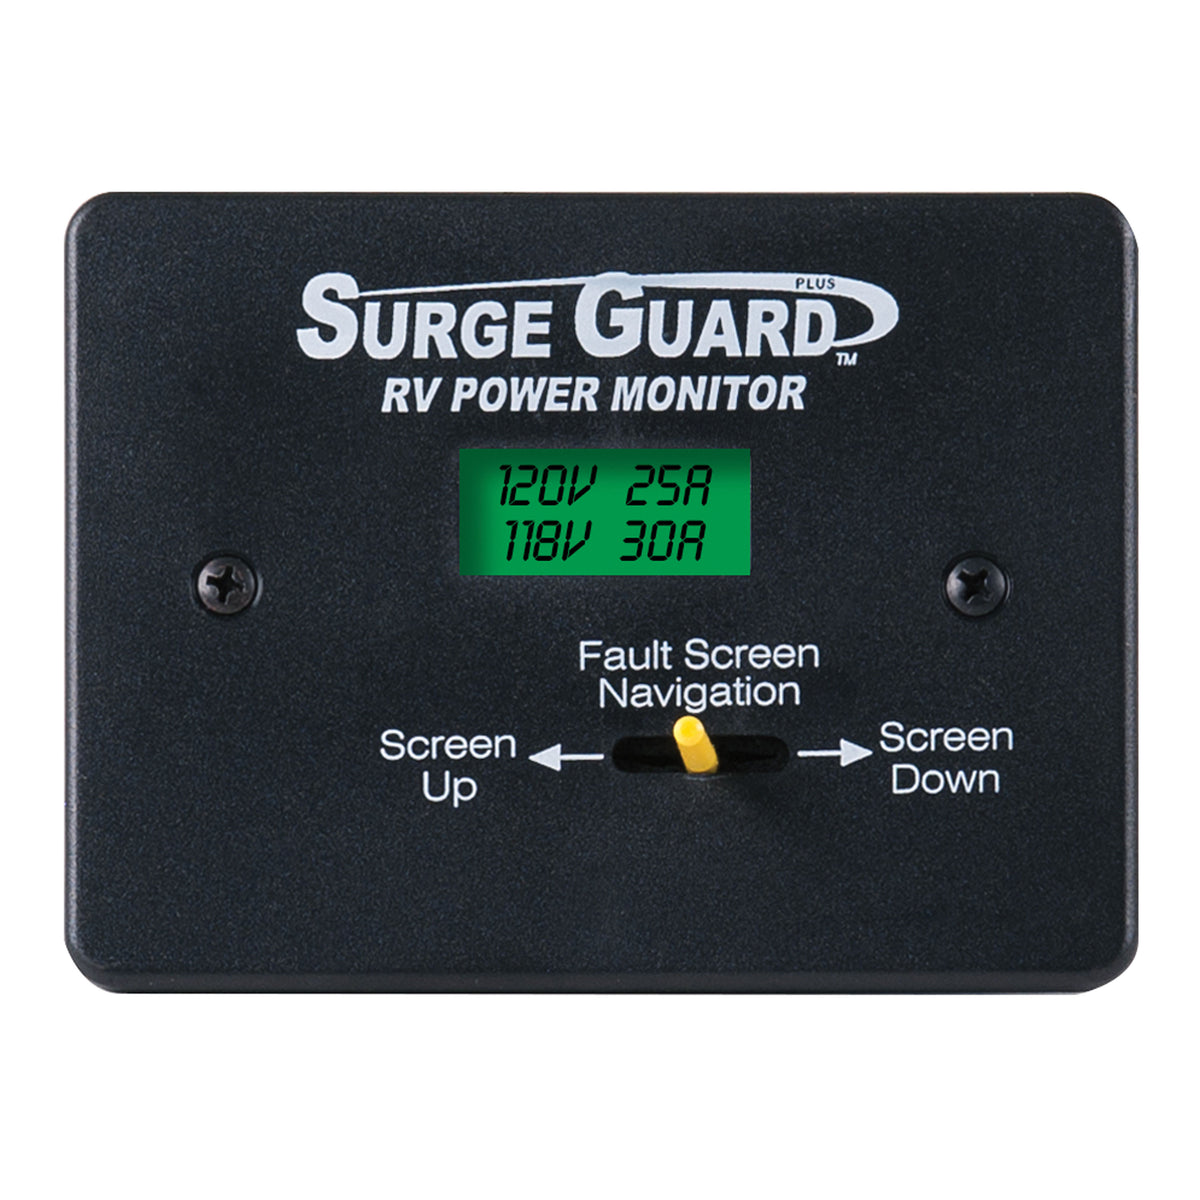 Southwire 40299 Surge Guard Remote Power Monitor with LCD Display - Fits ATS Models 40350 and 41390